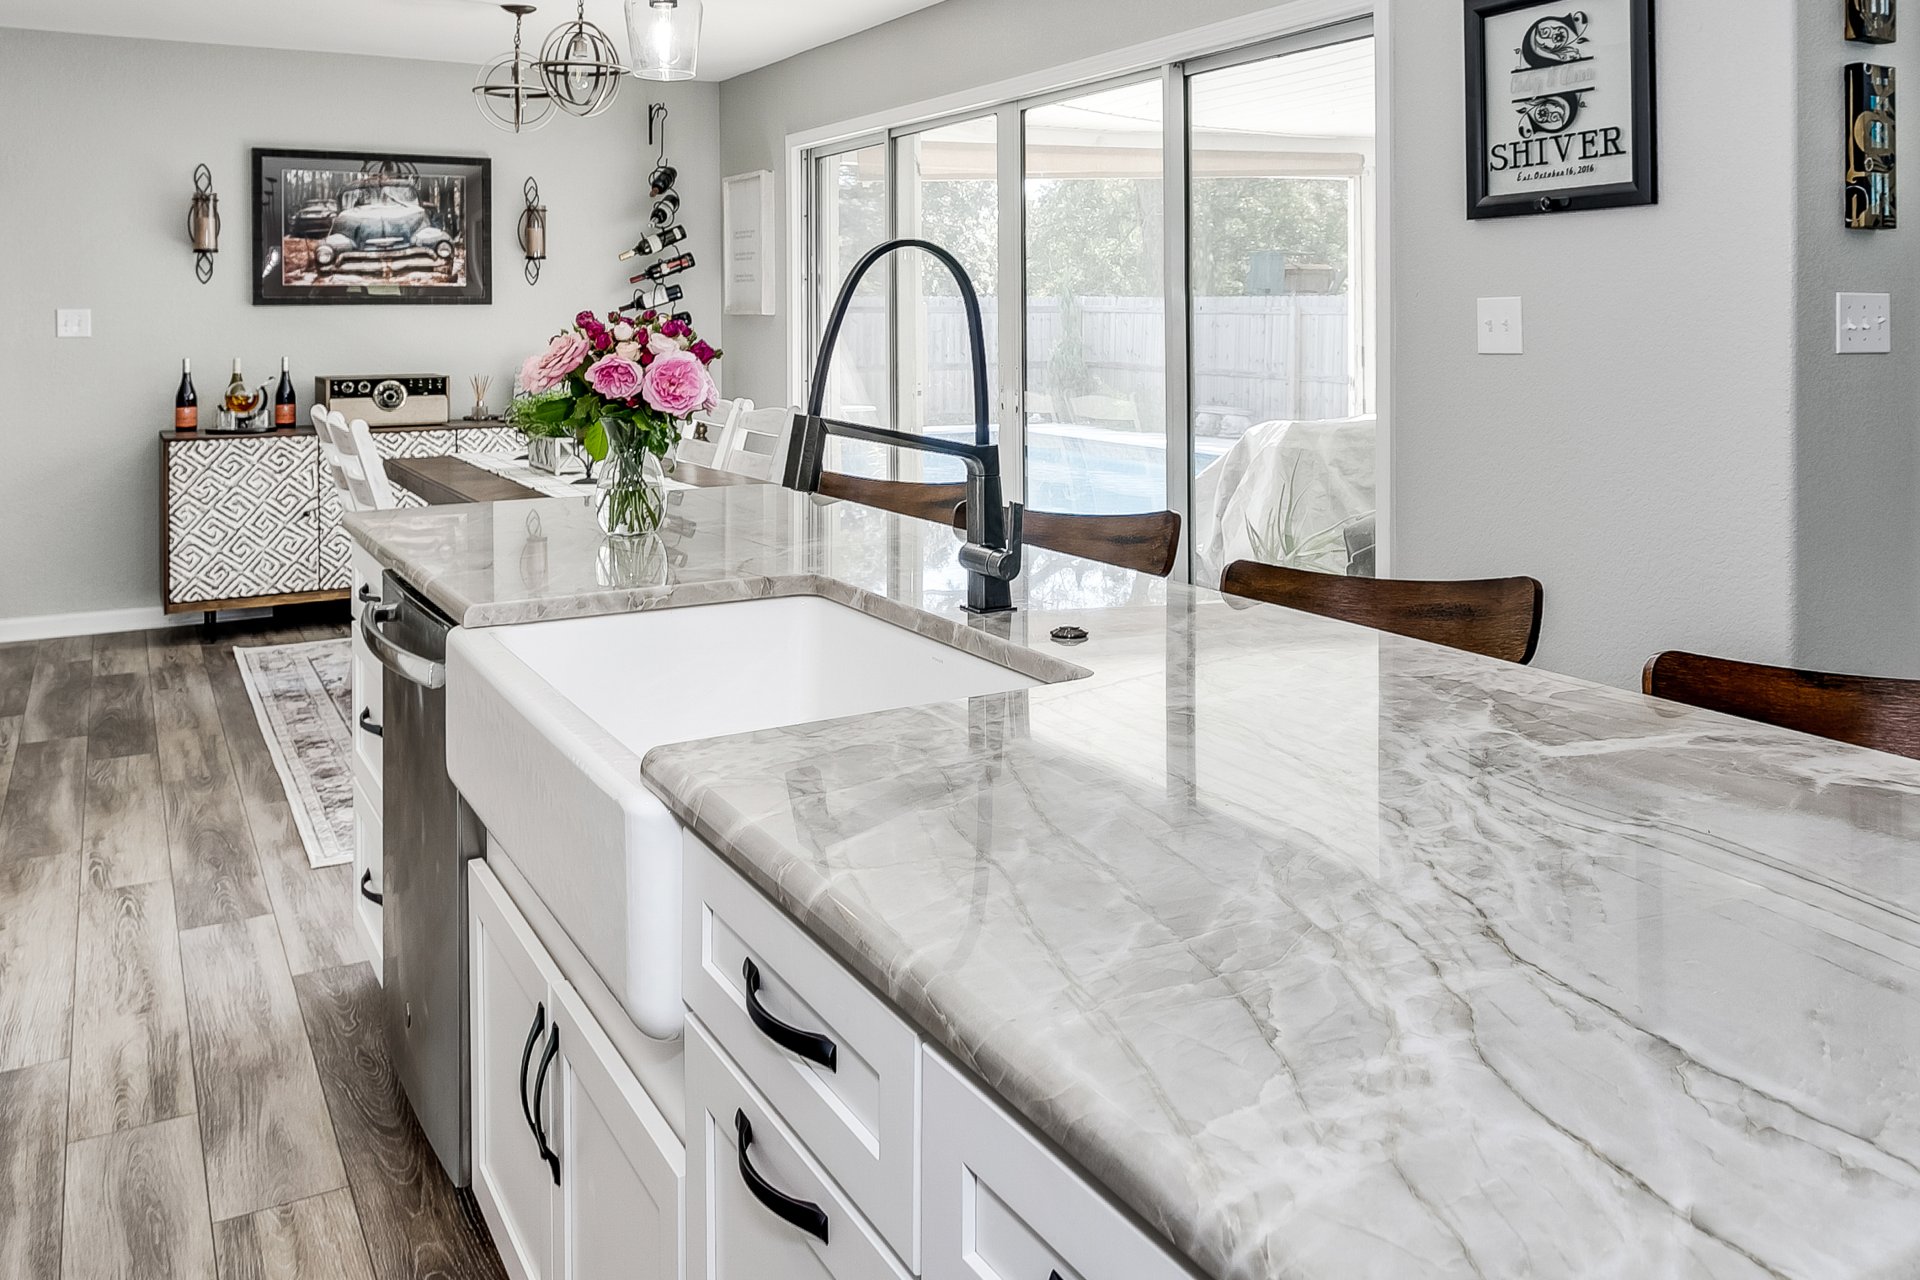 Stunning remodeled kitchen with new cabinets and countertops